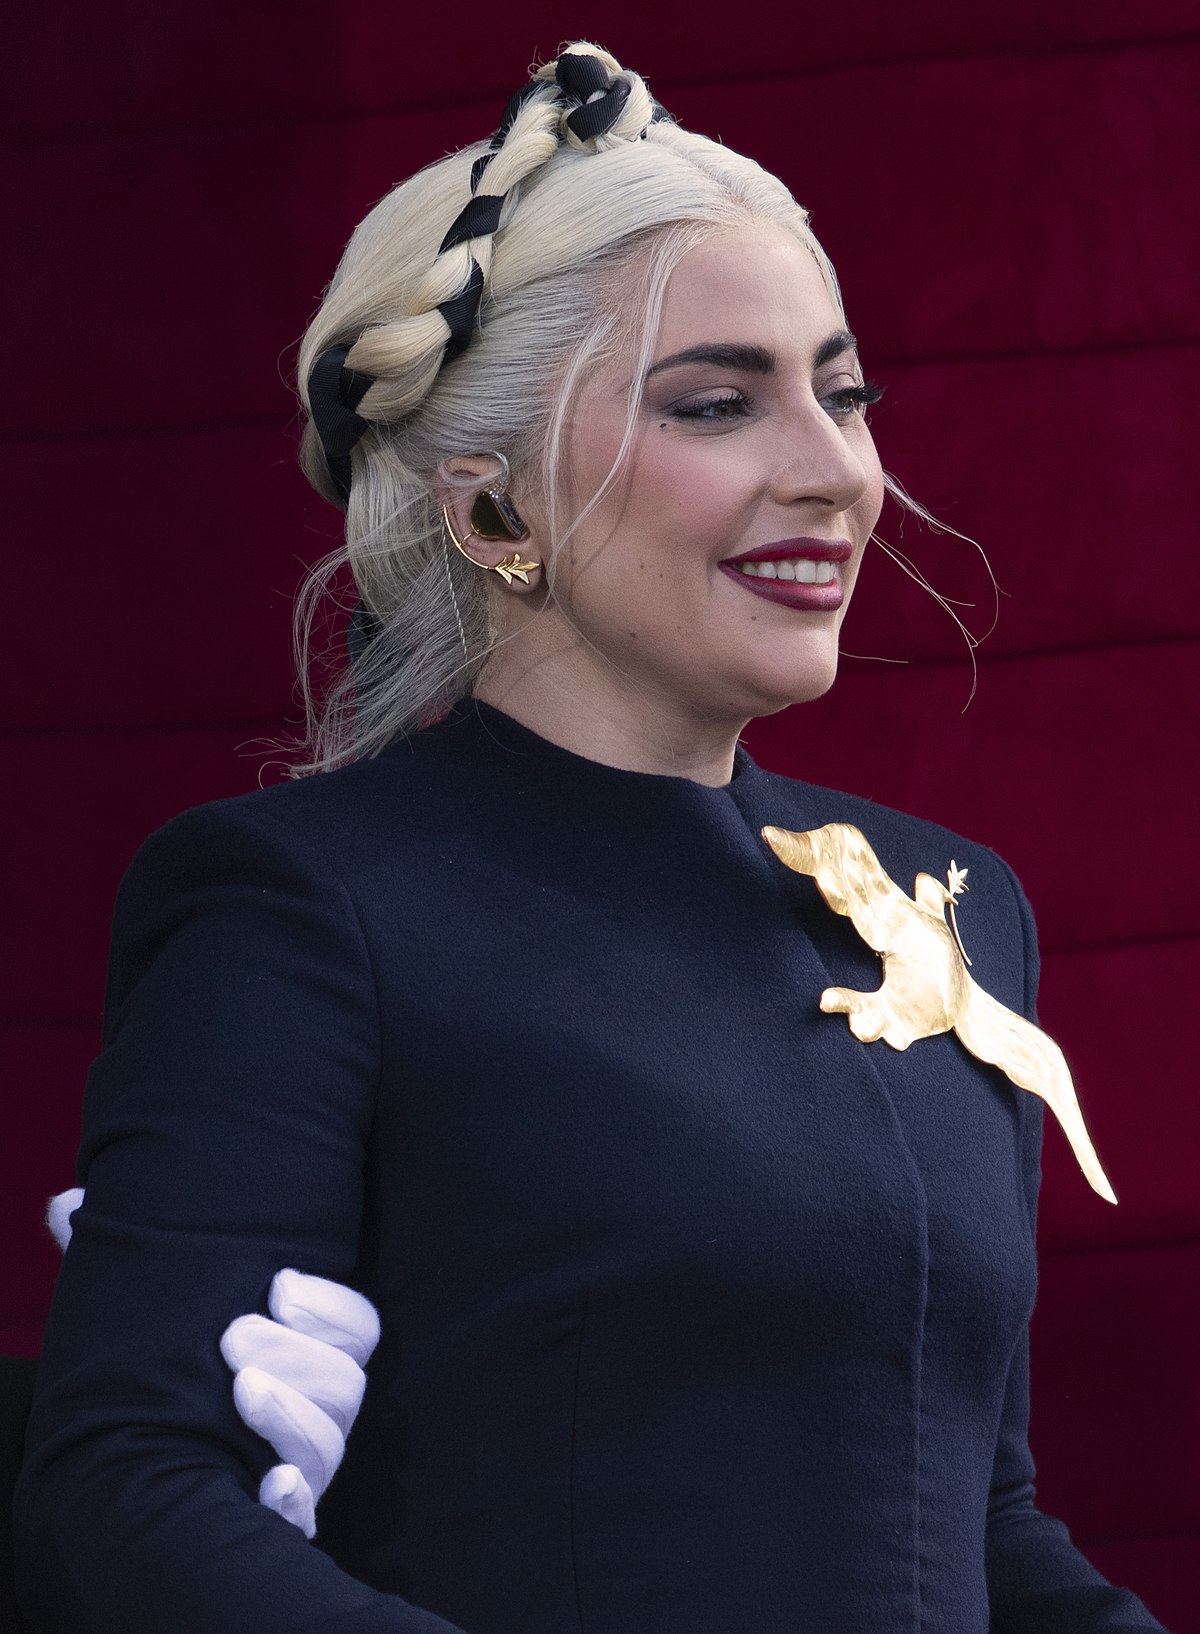 Entertainment News Roundup: Lady Gaga appears to confirm casting in 'Joker' sequel; Joaquin Phoenix to return to big screen as Joker in 2024 sequel and more